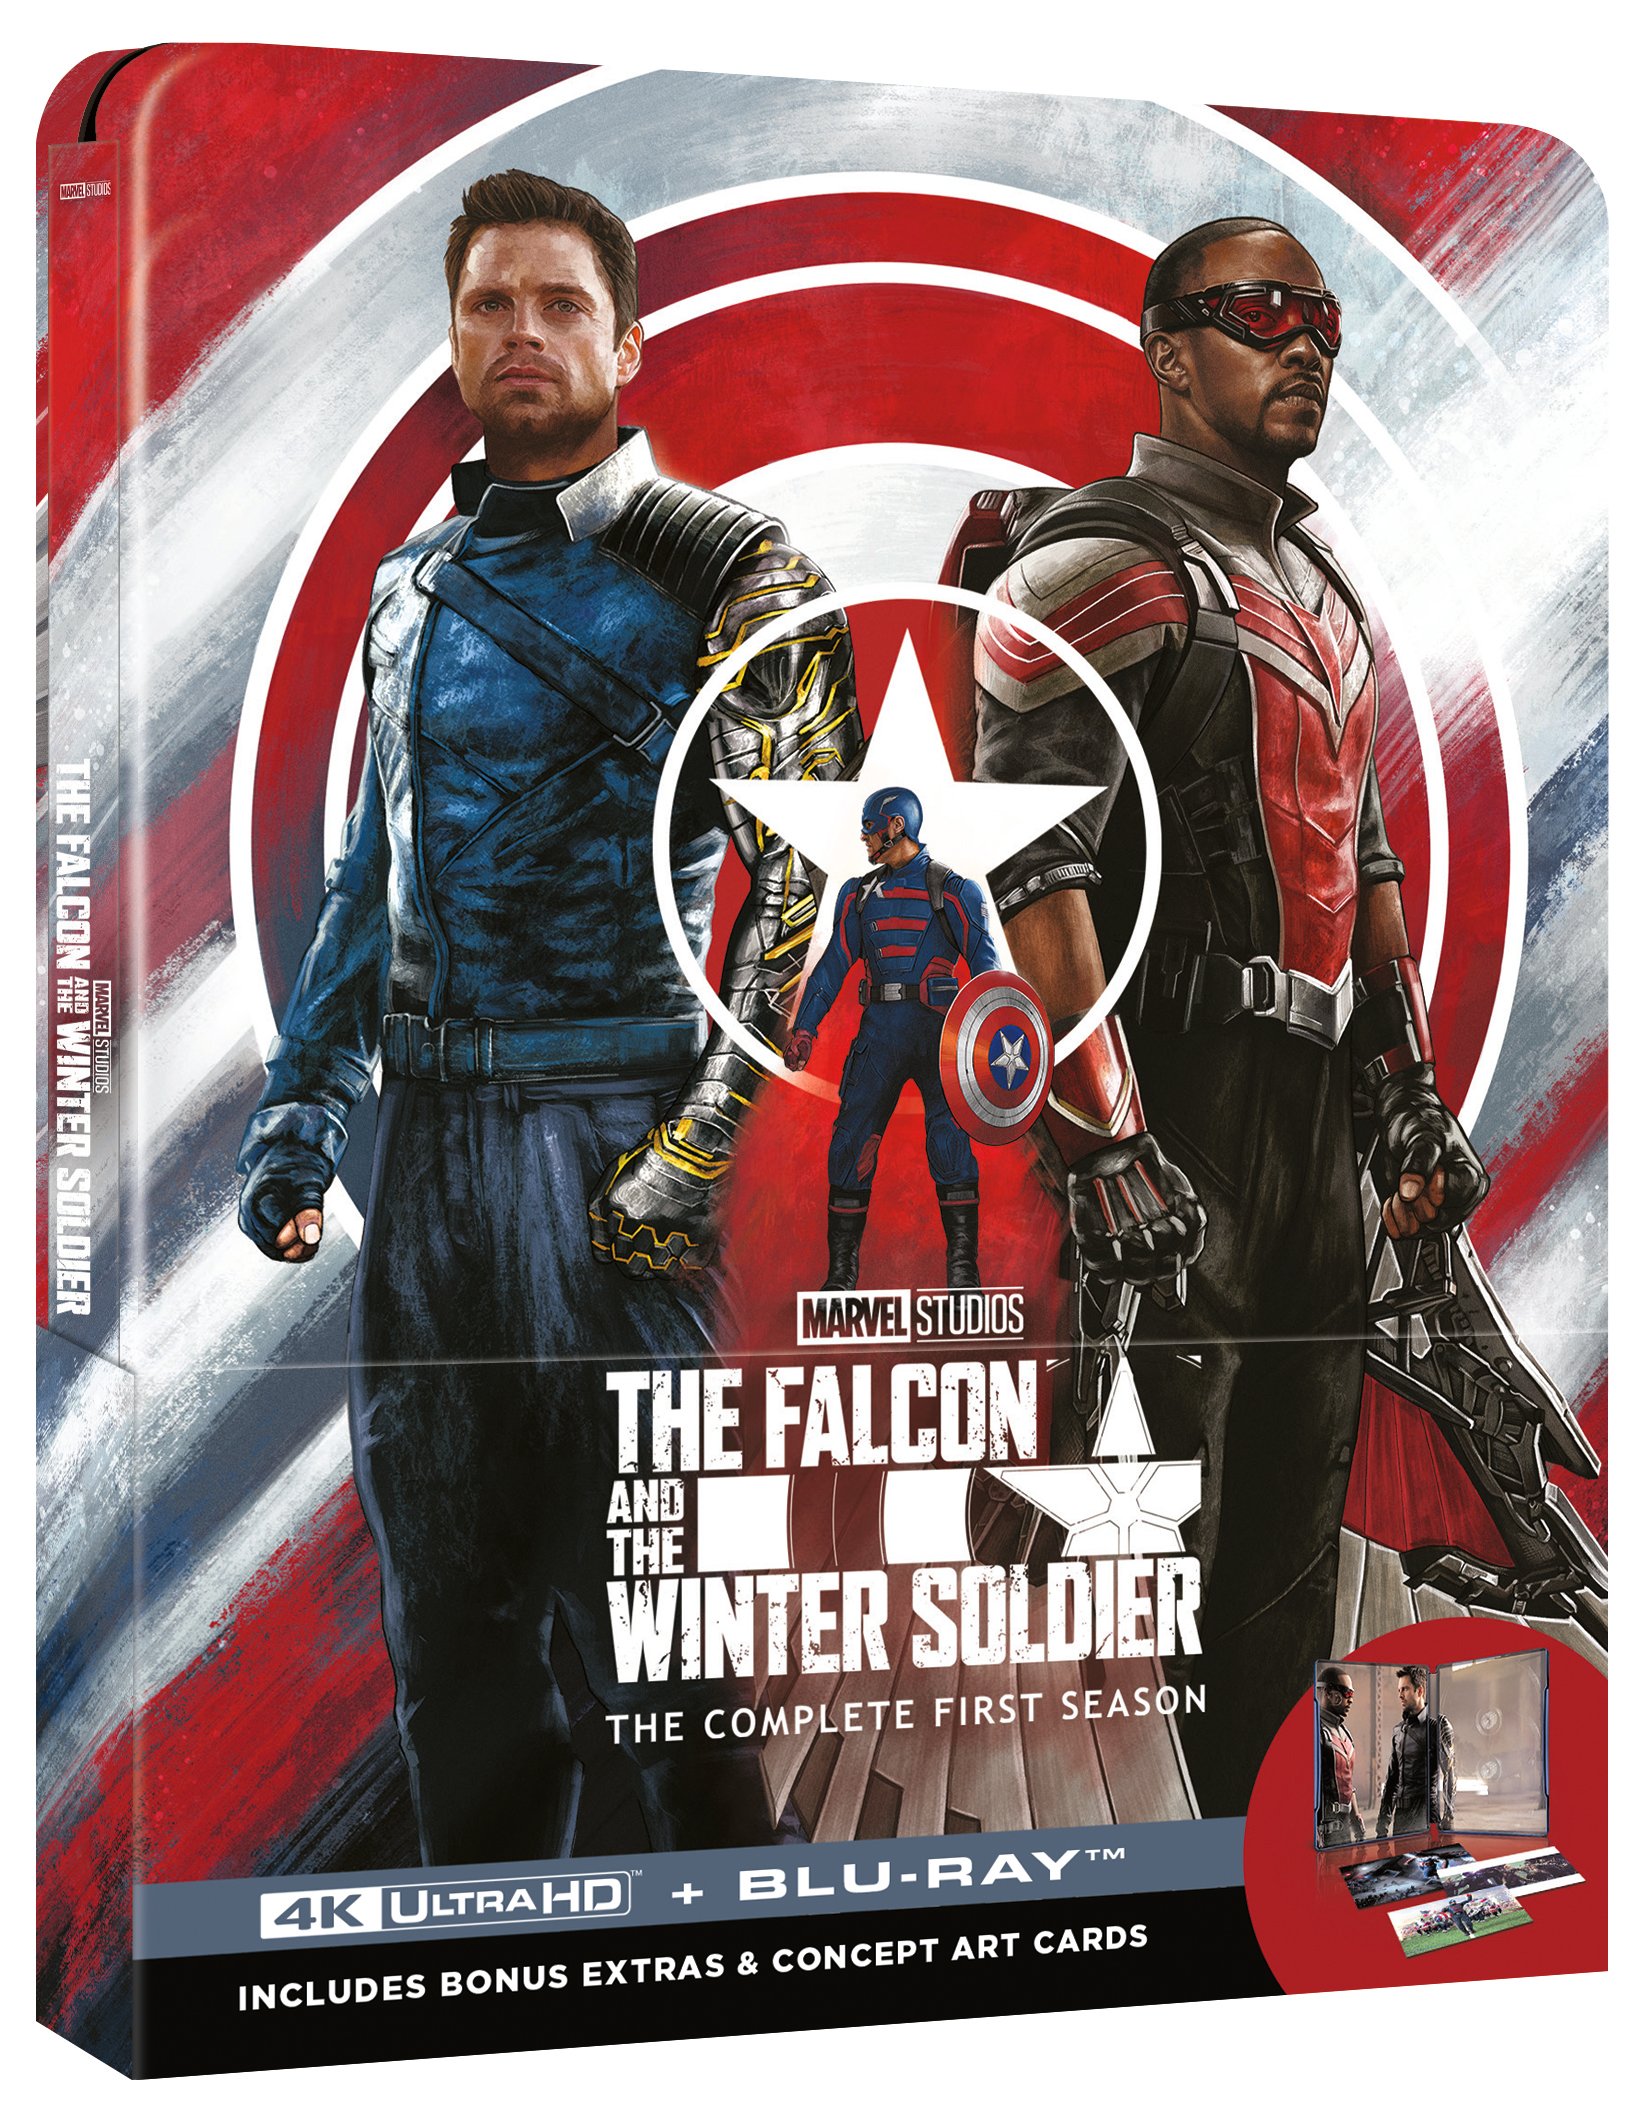 THE FALCON AND THE WINTER SOLDIER SEASON 1 - STEELBOOK - Filmer og TV-serier